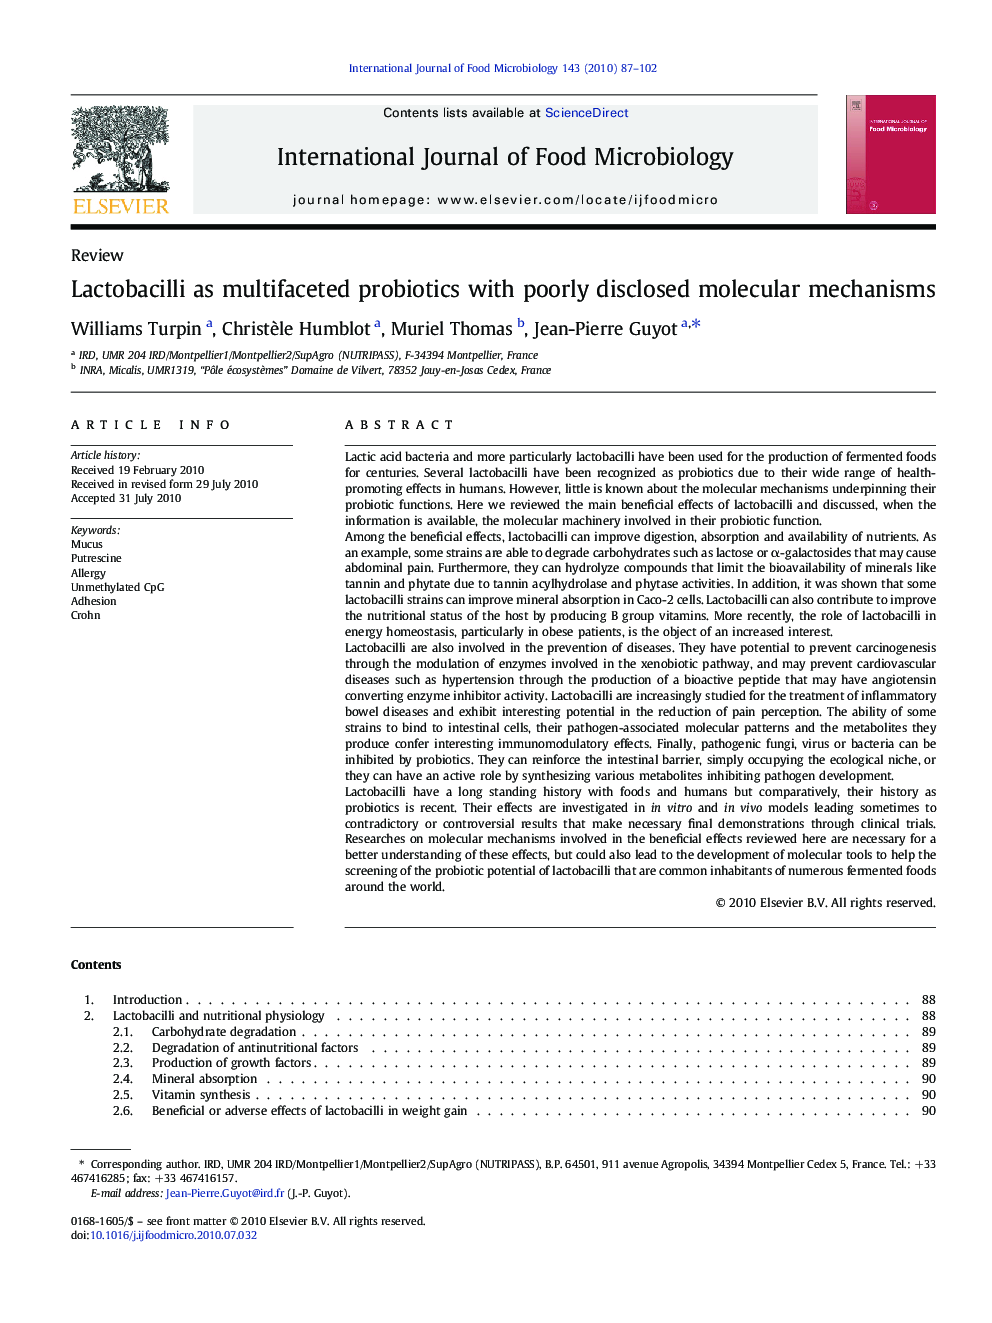 Lactobacilli as multifaceted probiotics with poorly disclosed molecular mechanisms